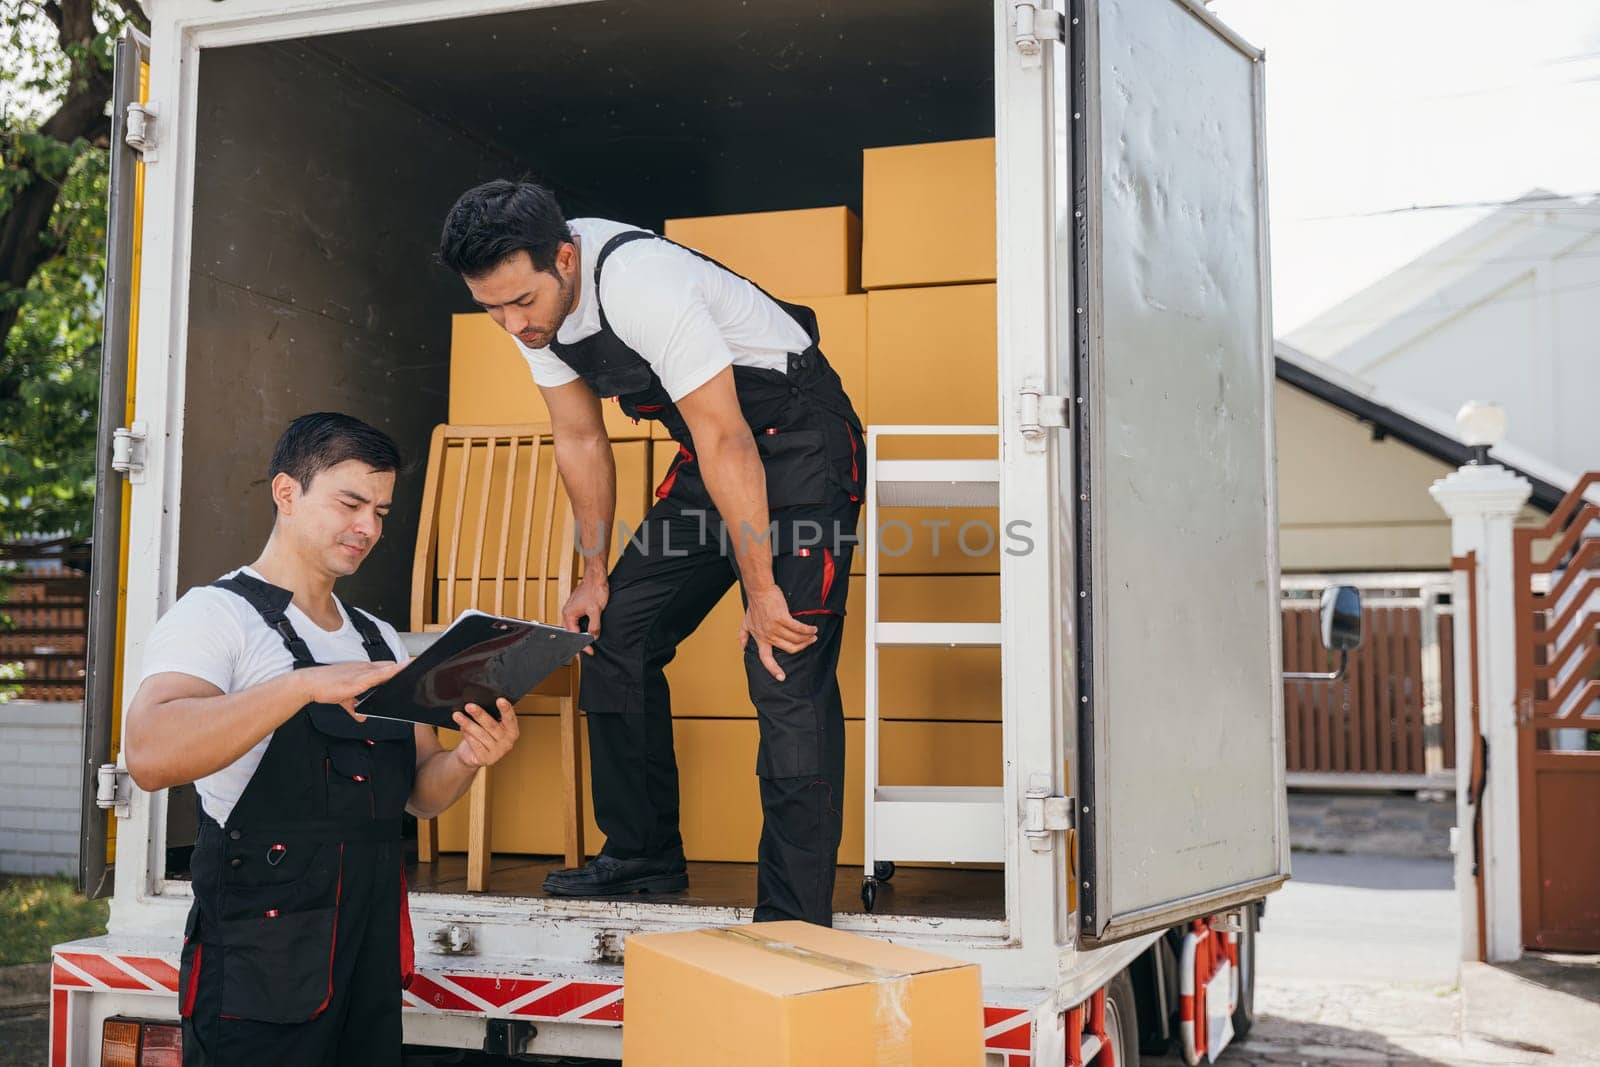 Uniformed workers unload cardboard boxes checking checklist with a clipboard at the truck. Reliable movers guarantee efficient moving and professional service. Moving day concept